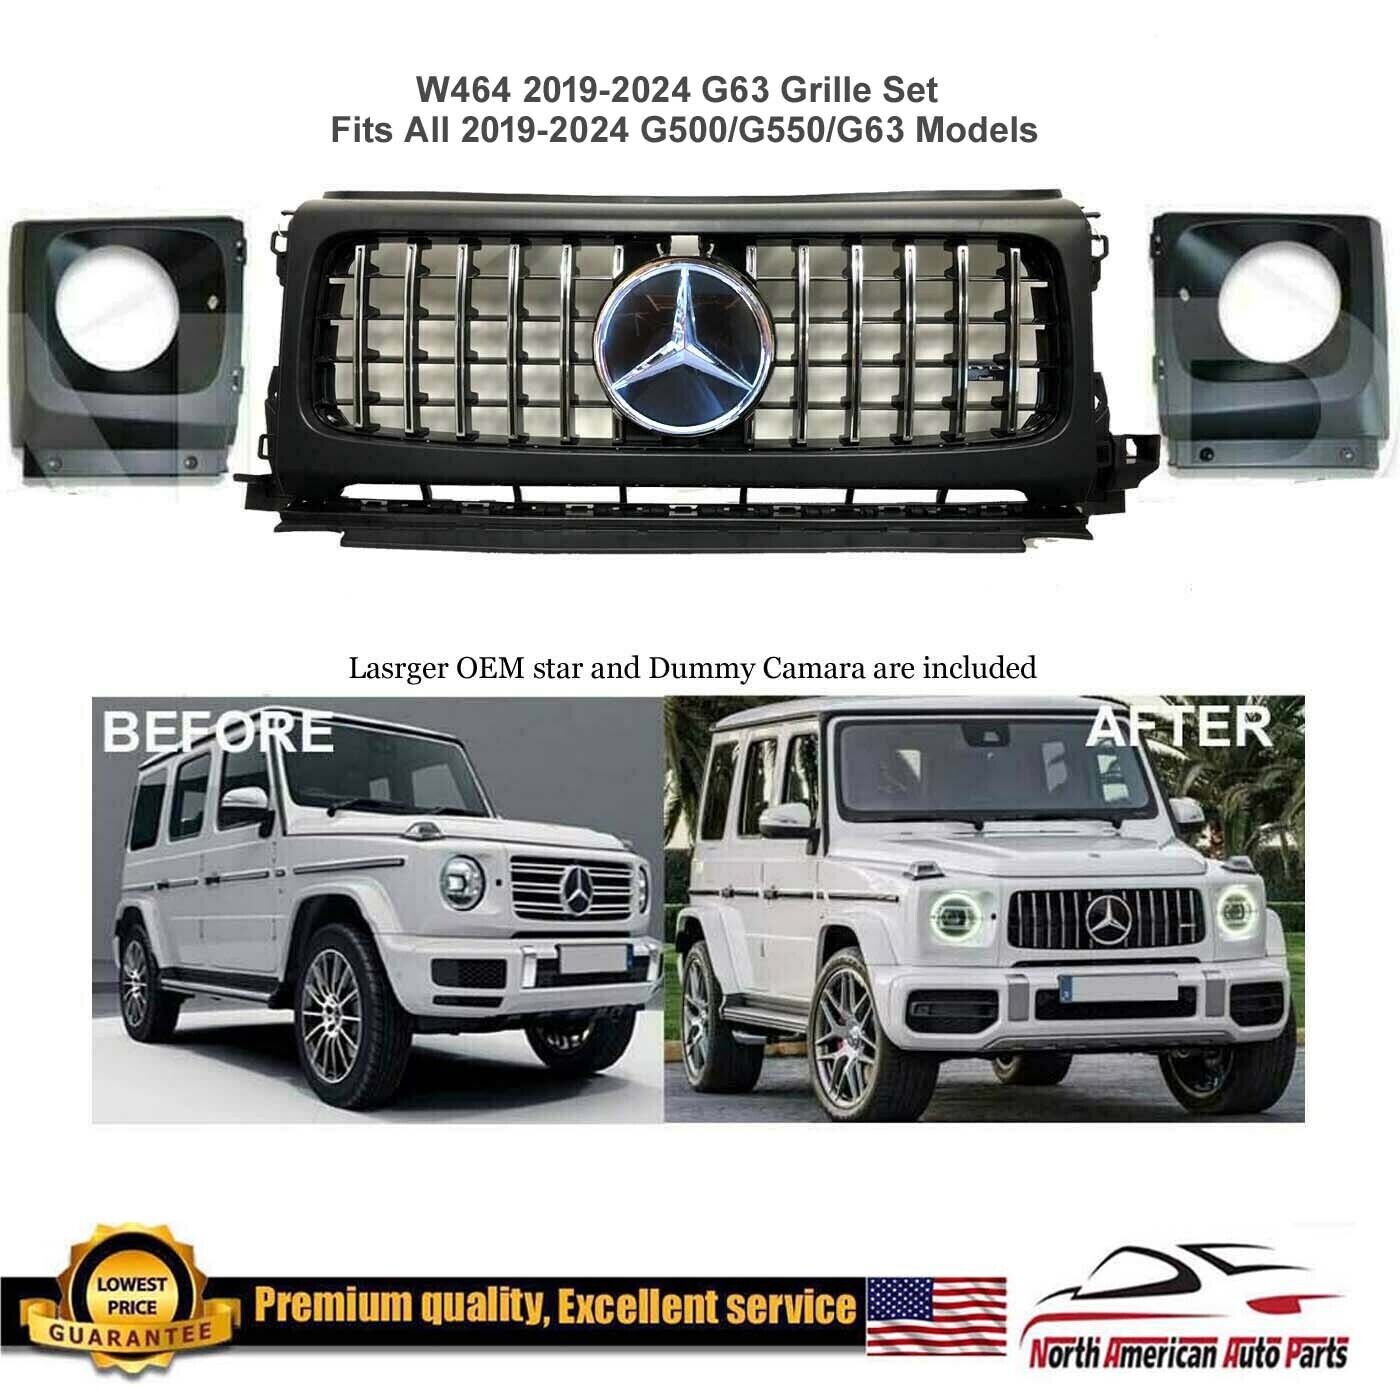 G63 Grille + Headlight Covers Star G500 G550 To AMG 2019 2020 2021 2022 2023